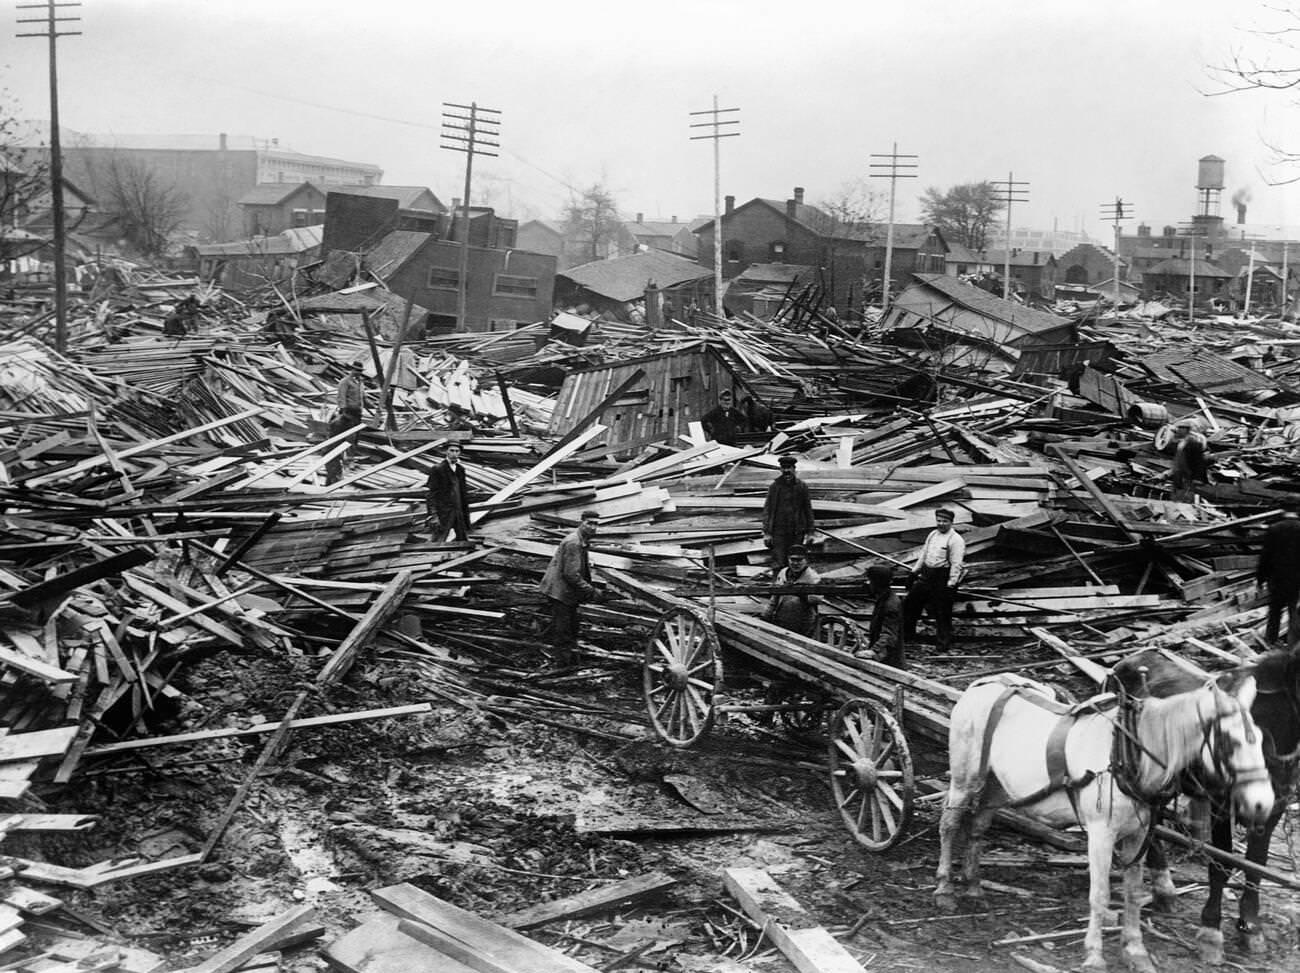 View of Dayton, Ohio after the flood, March 1913.